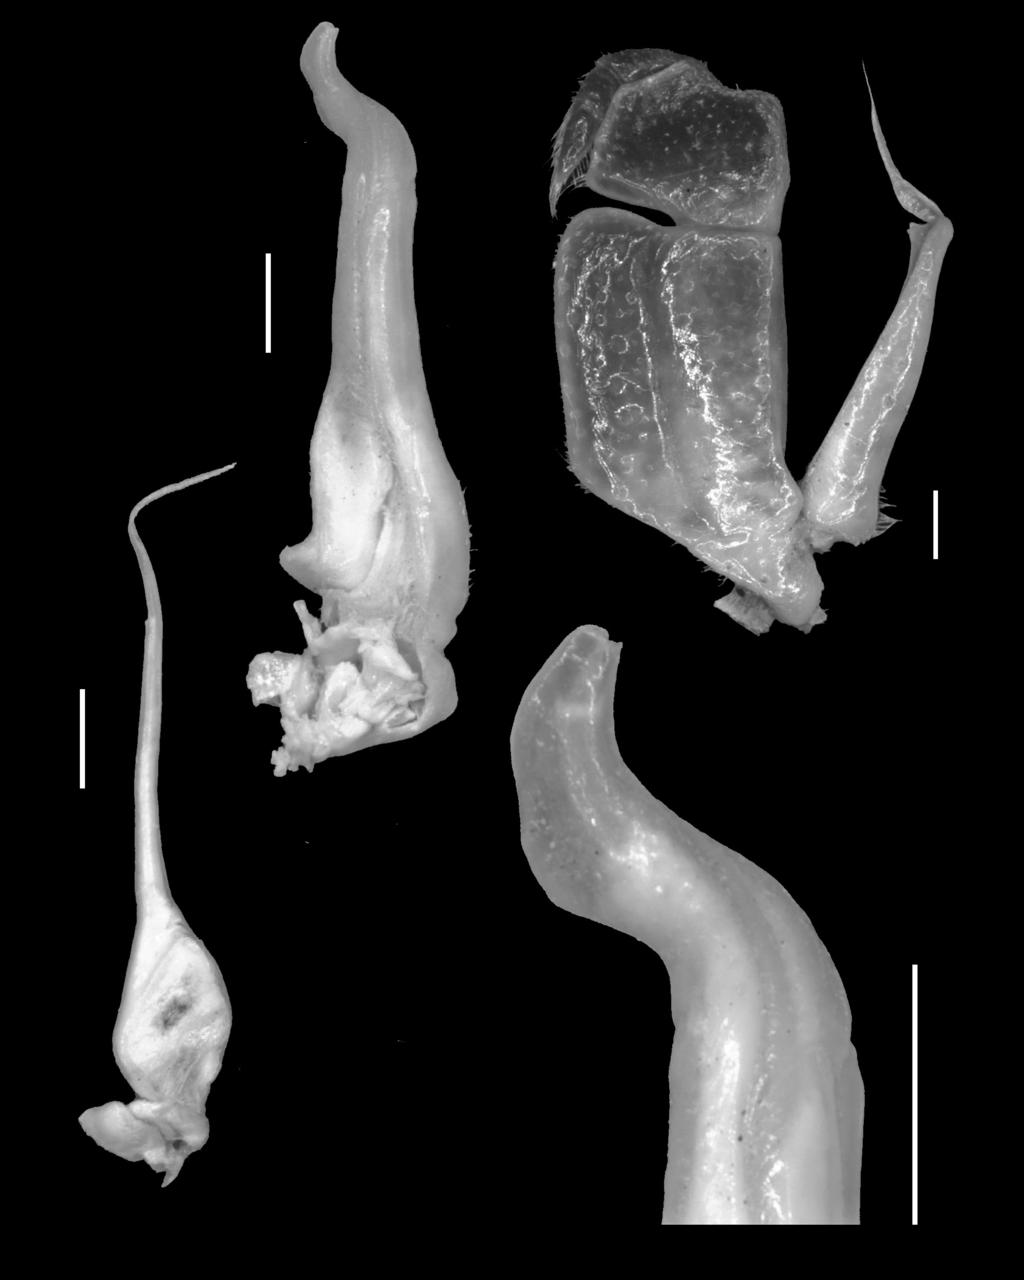 page 8 of 20 closed (Fig. 3A). Ambulatory legs (pereopods 2-5) slender, with dense short setae on dactylus, relatively sparse short setae on the propodus, carpus and merus (Fig. 3A). Pereopod 5 with propodus about 2 times as long as board, subequal to dactylus (Fig.